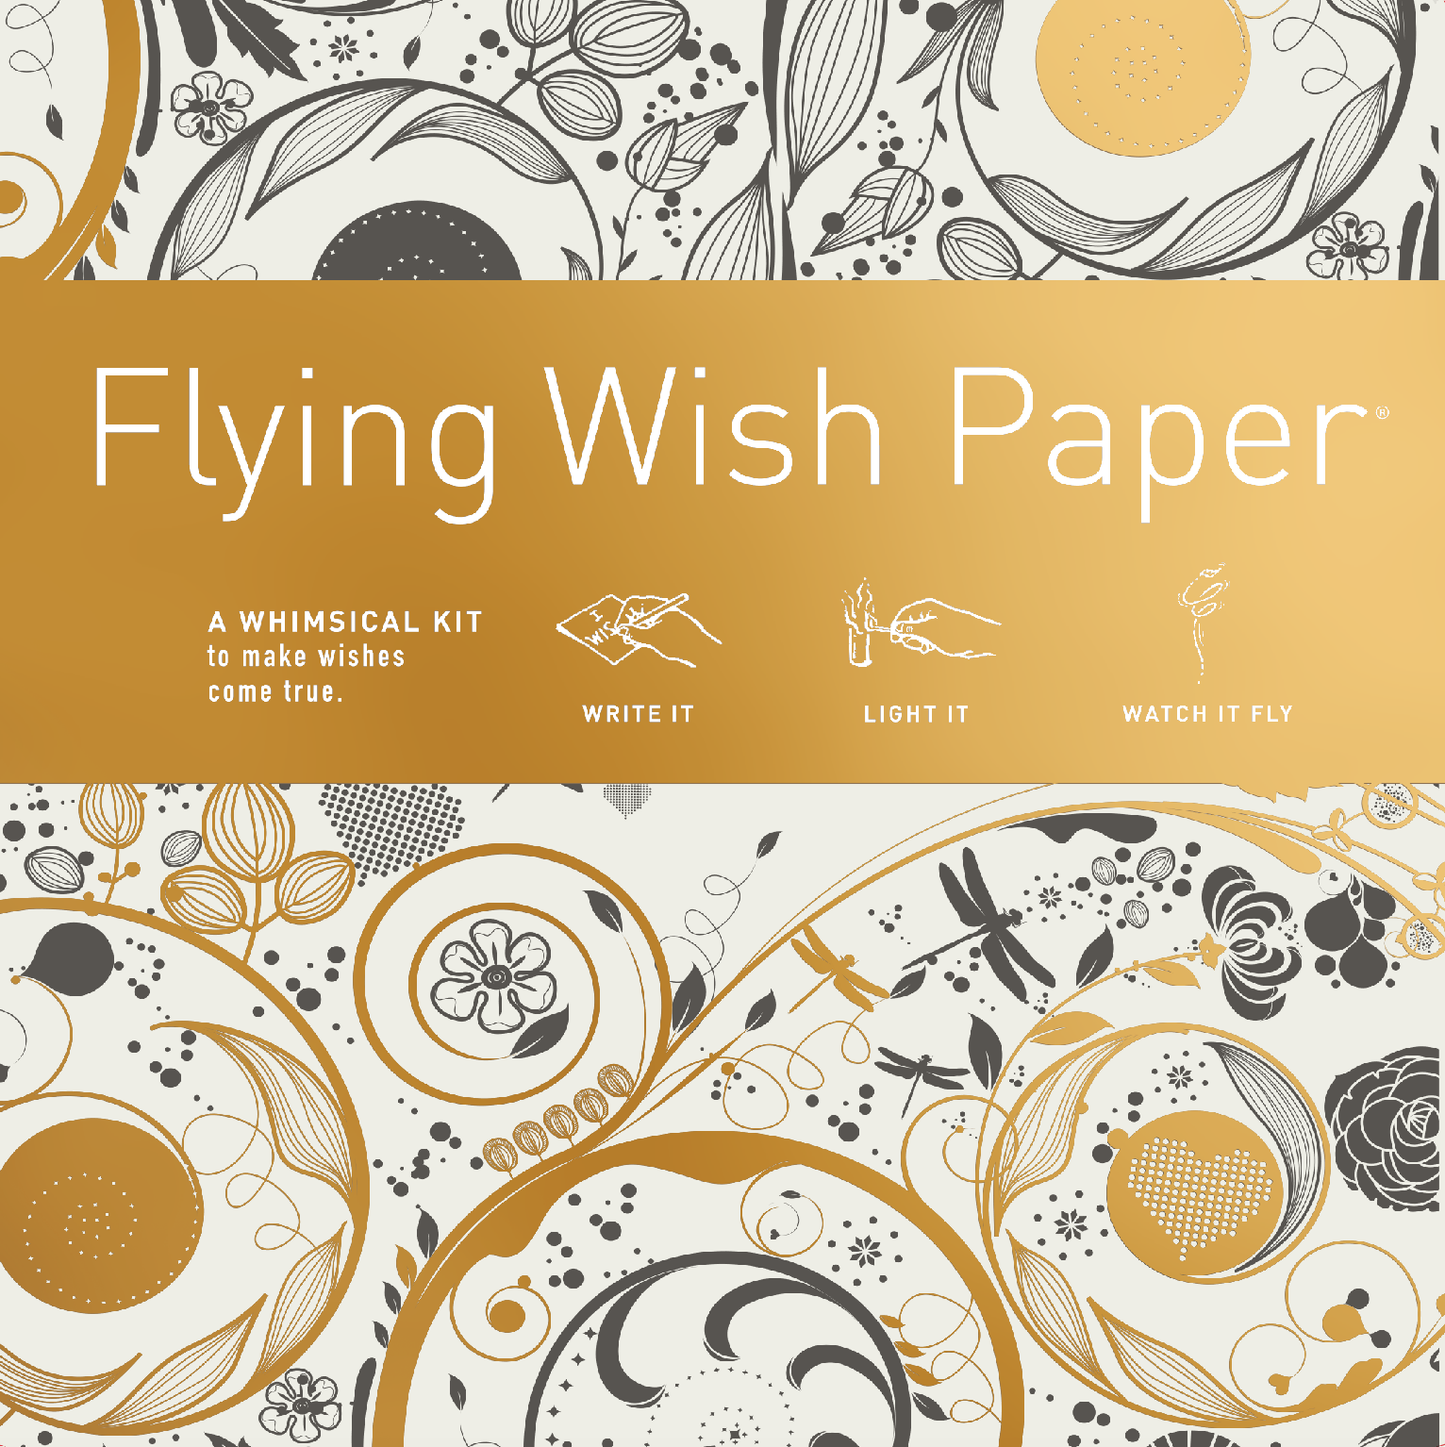 FLYING WISH PAPER 'Swirls' / Large Kit with 50 Wishes + accessories